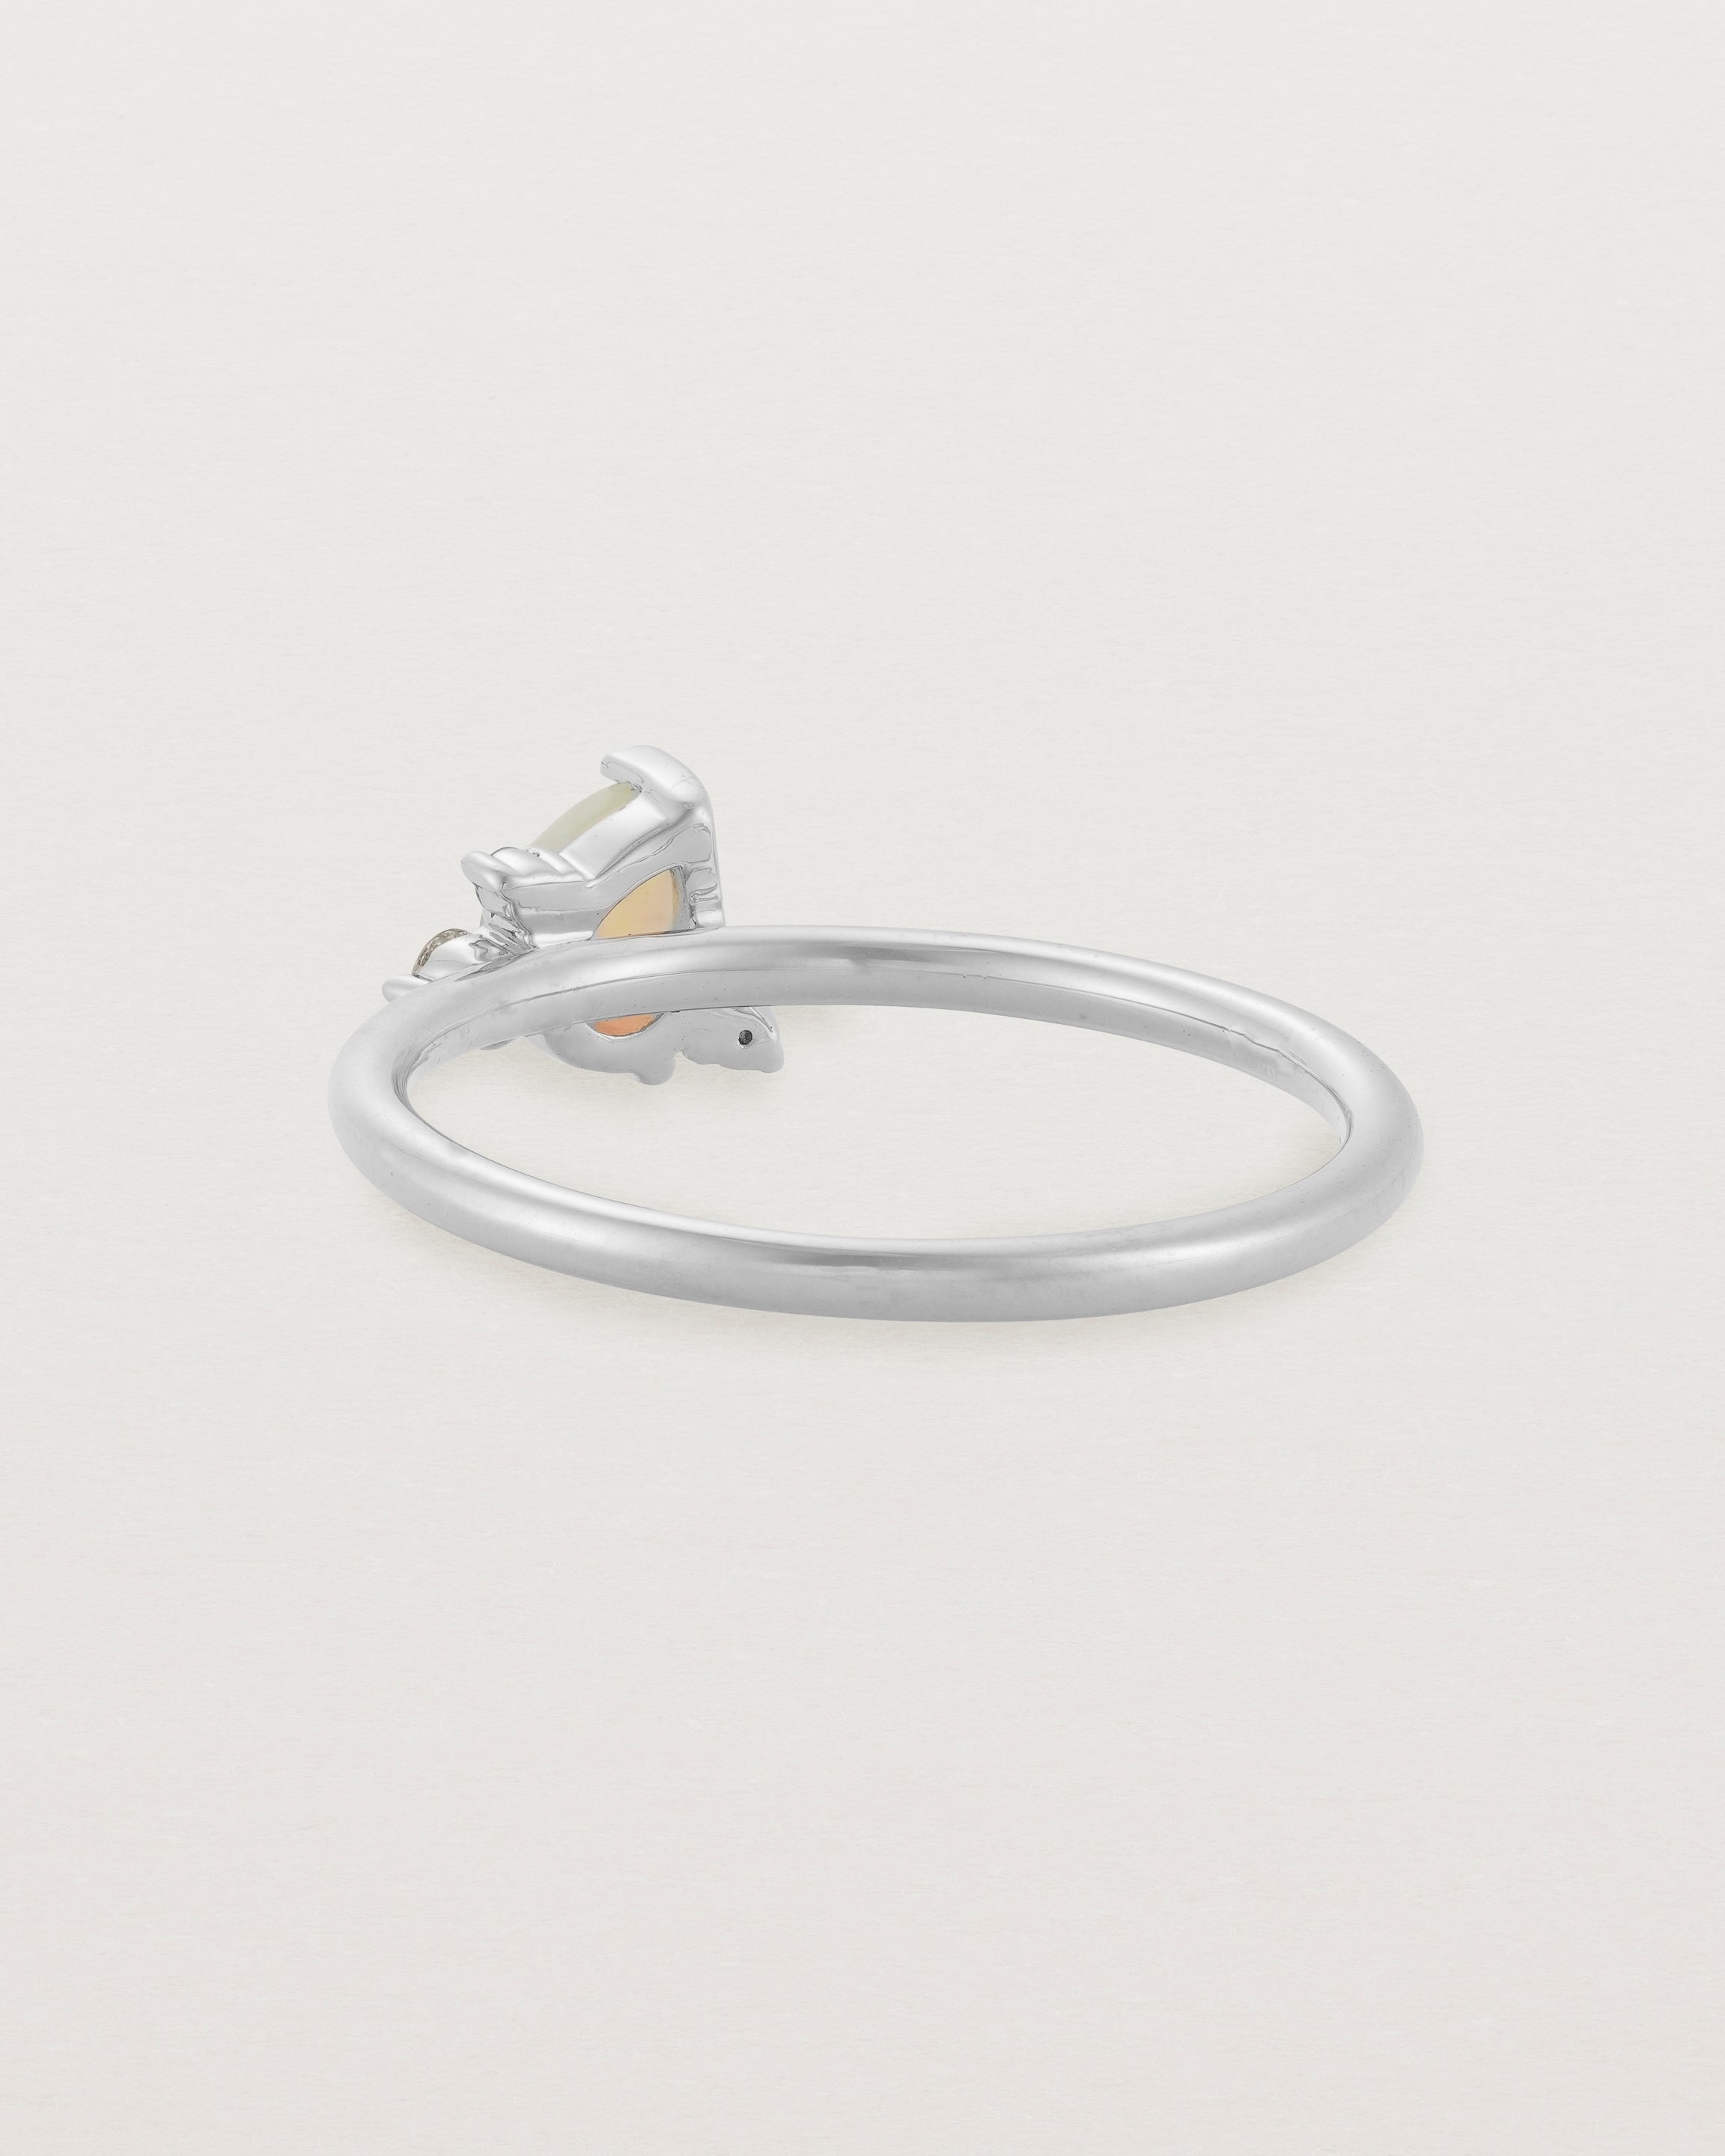 Back view of the Aeni Cluster Ring | Opal | White Gold.